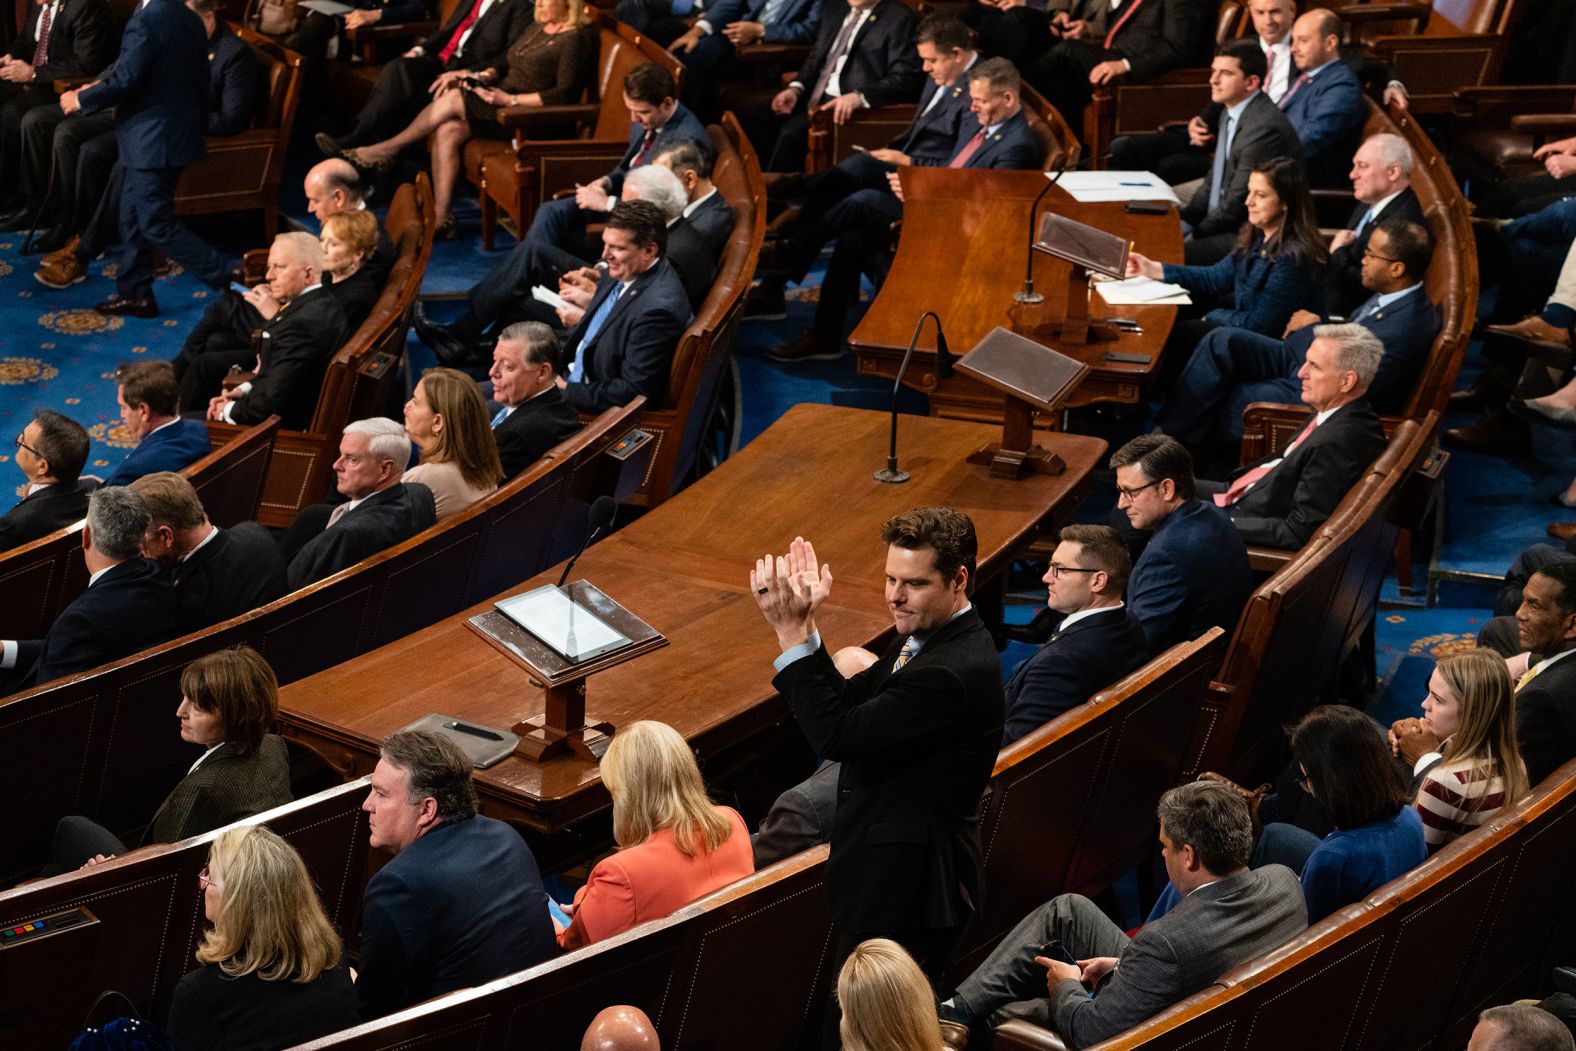 Gaetz applauds during one of Thursday's votes. Gaetz has been one of the Republicans voting against McCarthy, and on Thursday he even cast votes for former President Donald Trump. <a href="index.php?page=&url=https%3A%2F%2Fwww.cnn.com%2Fpolitics%2Flive-news%2Fhouse-speaker-leadership-vote-01-05-23%2Fh_1d4ca25219080226a8285766c395b803" target="_blank">He told CNN Thursday</a> that the vote for speakership can end in two ways: "Either Kevin McCarthy withdraws from the race, or we construct a straitjacket that he is unable to evade."